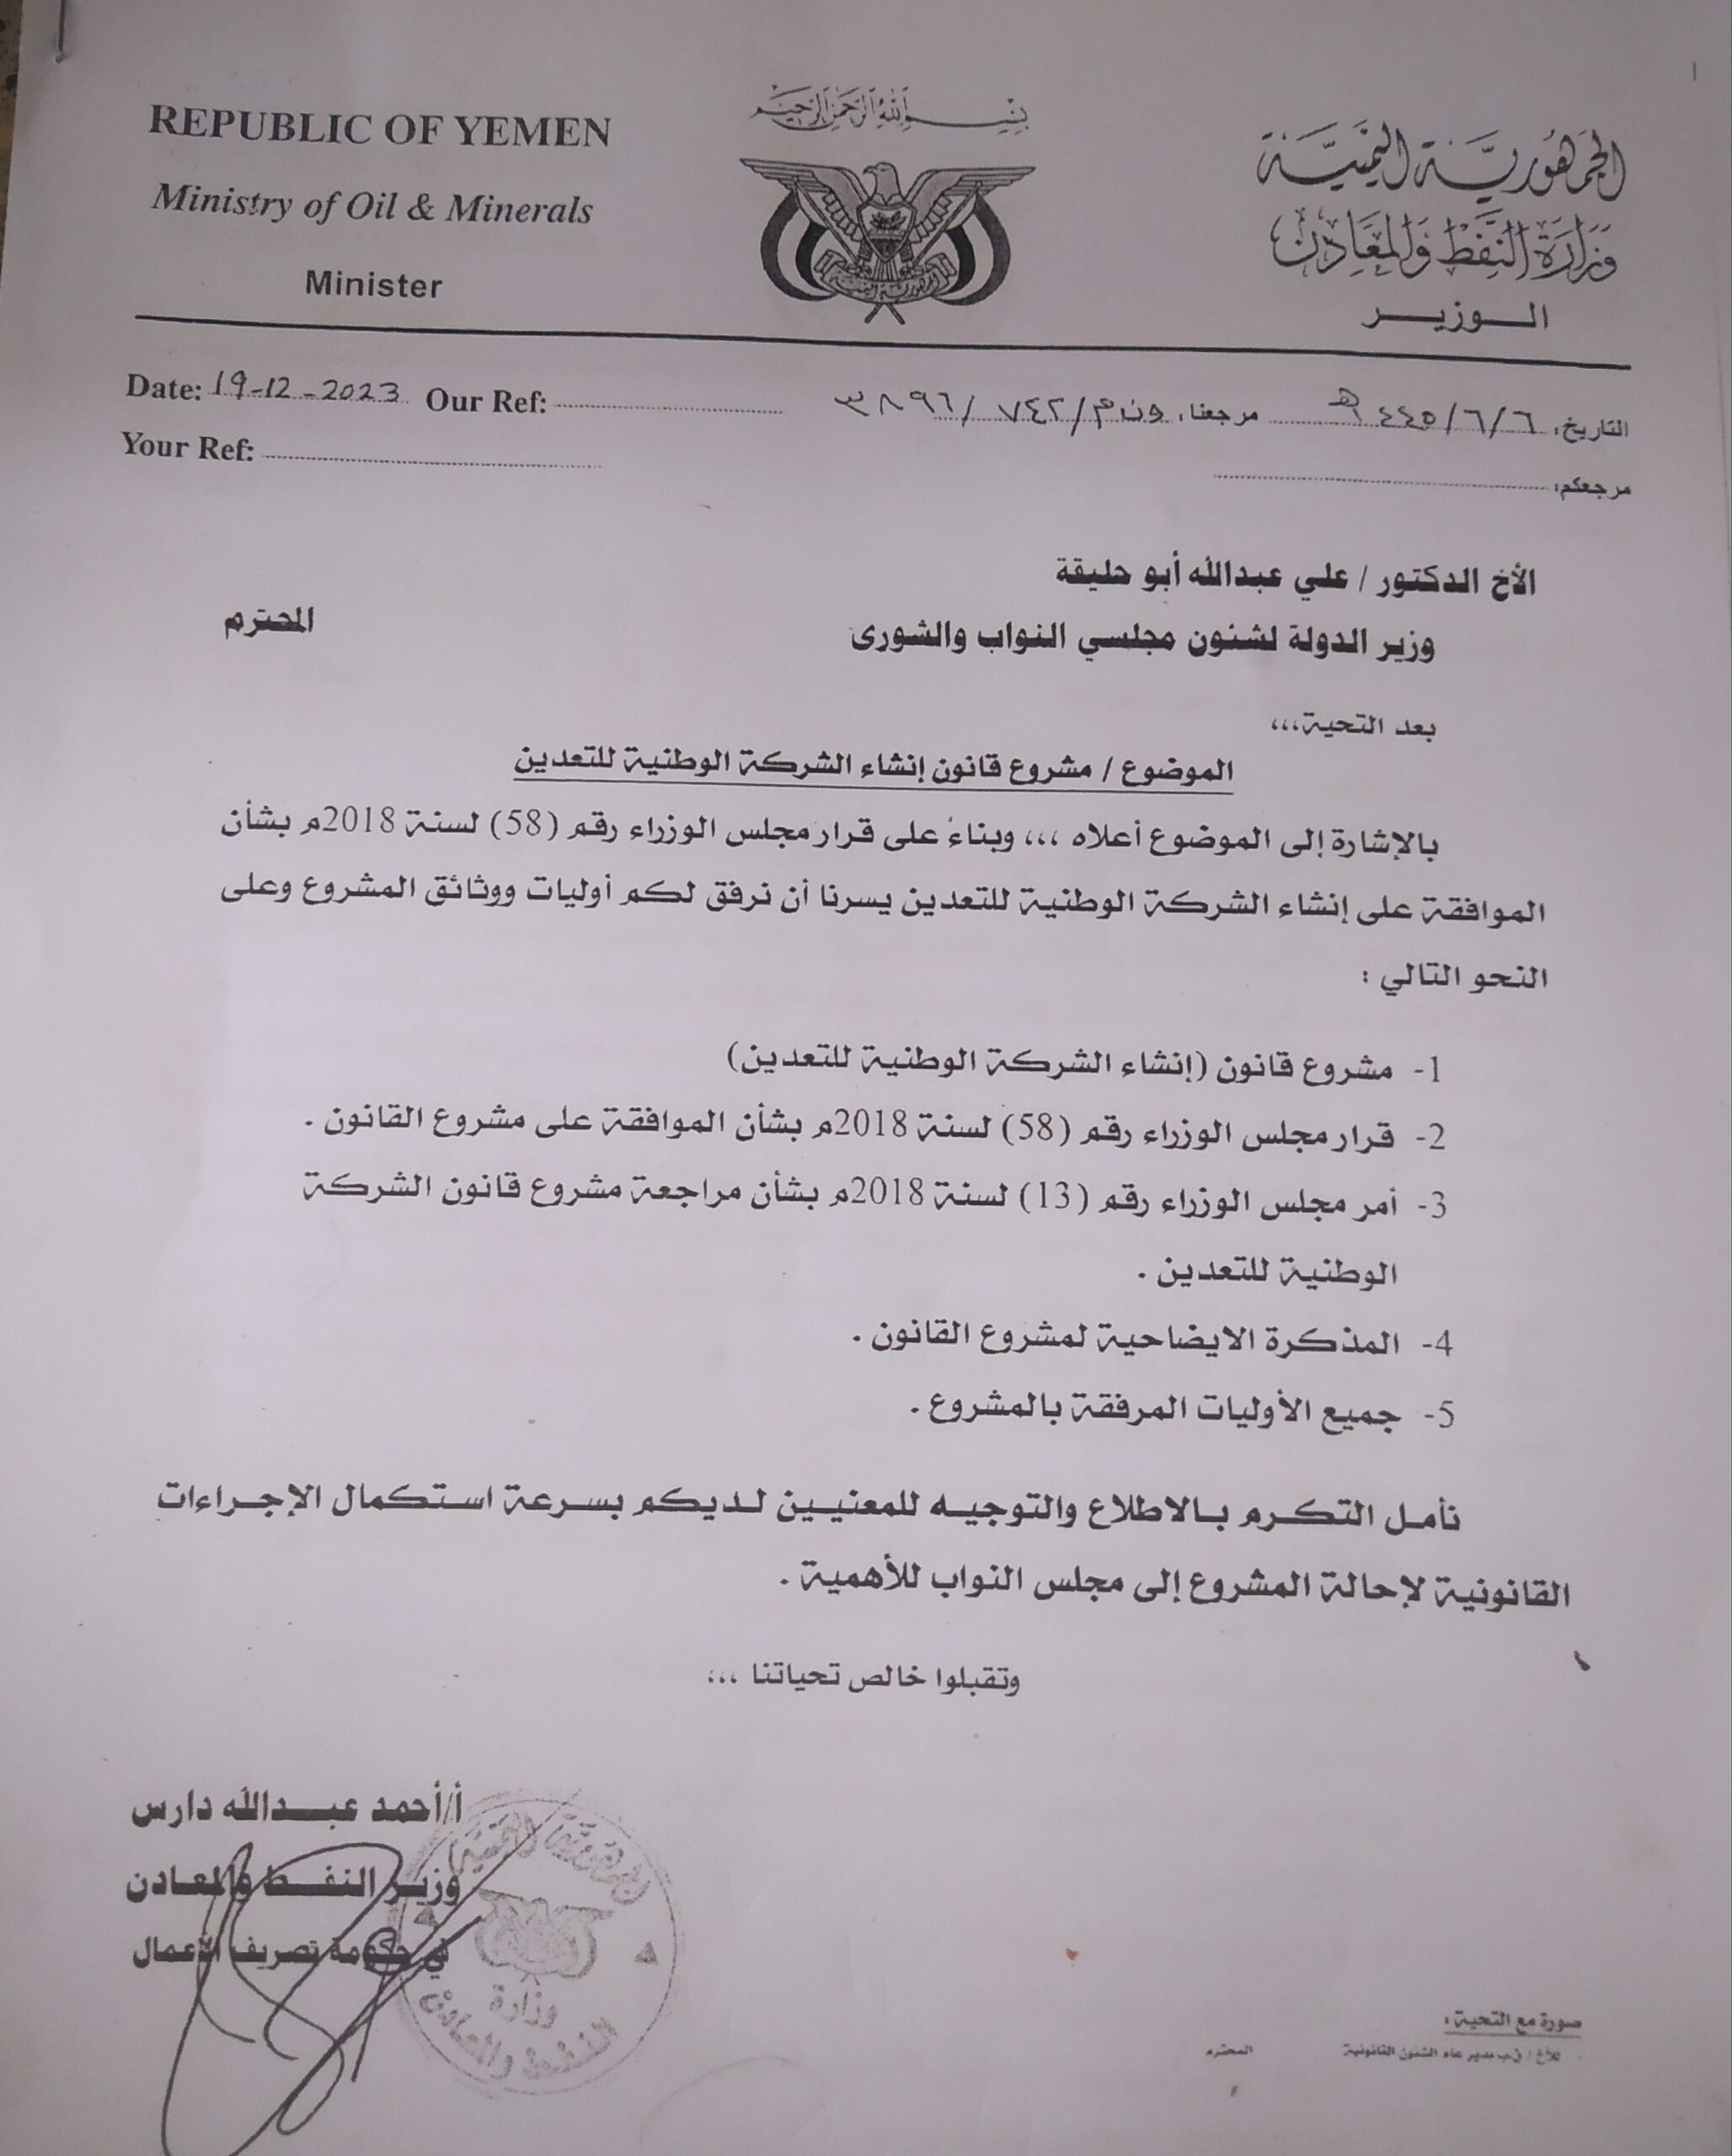 “Yamnat” is exclusive in publishing the draft regulation establishing the National Mining Company submitted to the House of Representatives in Sana’a.